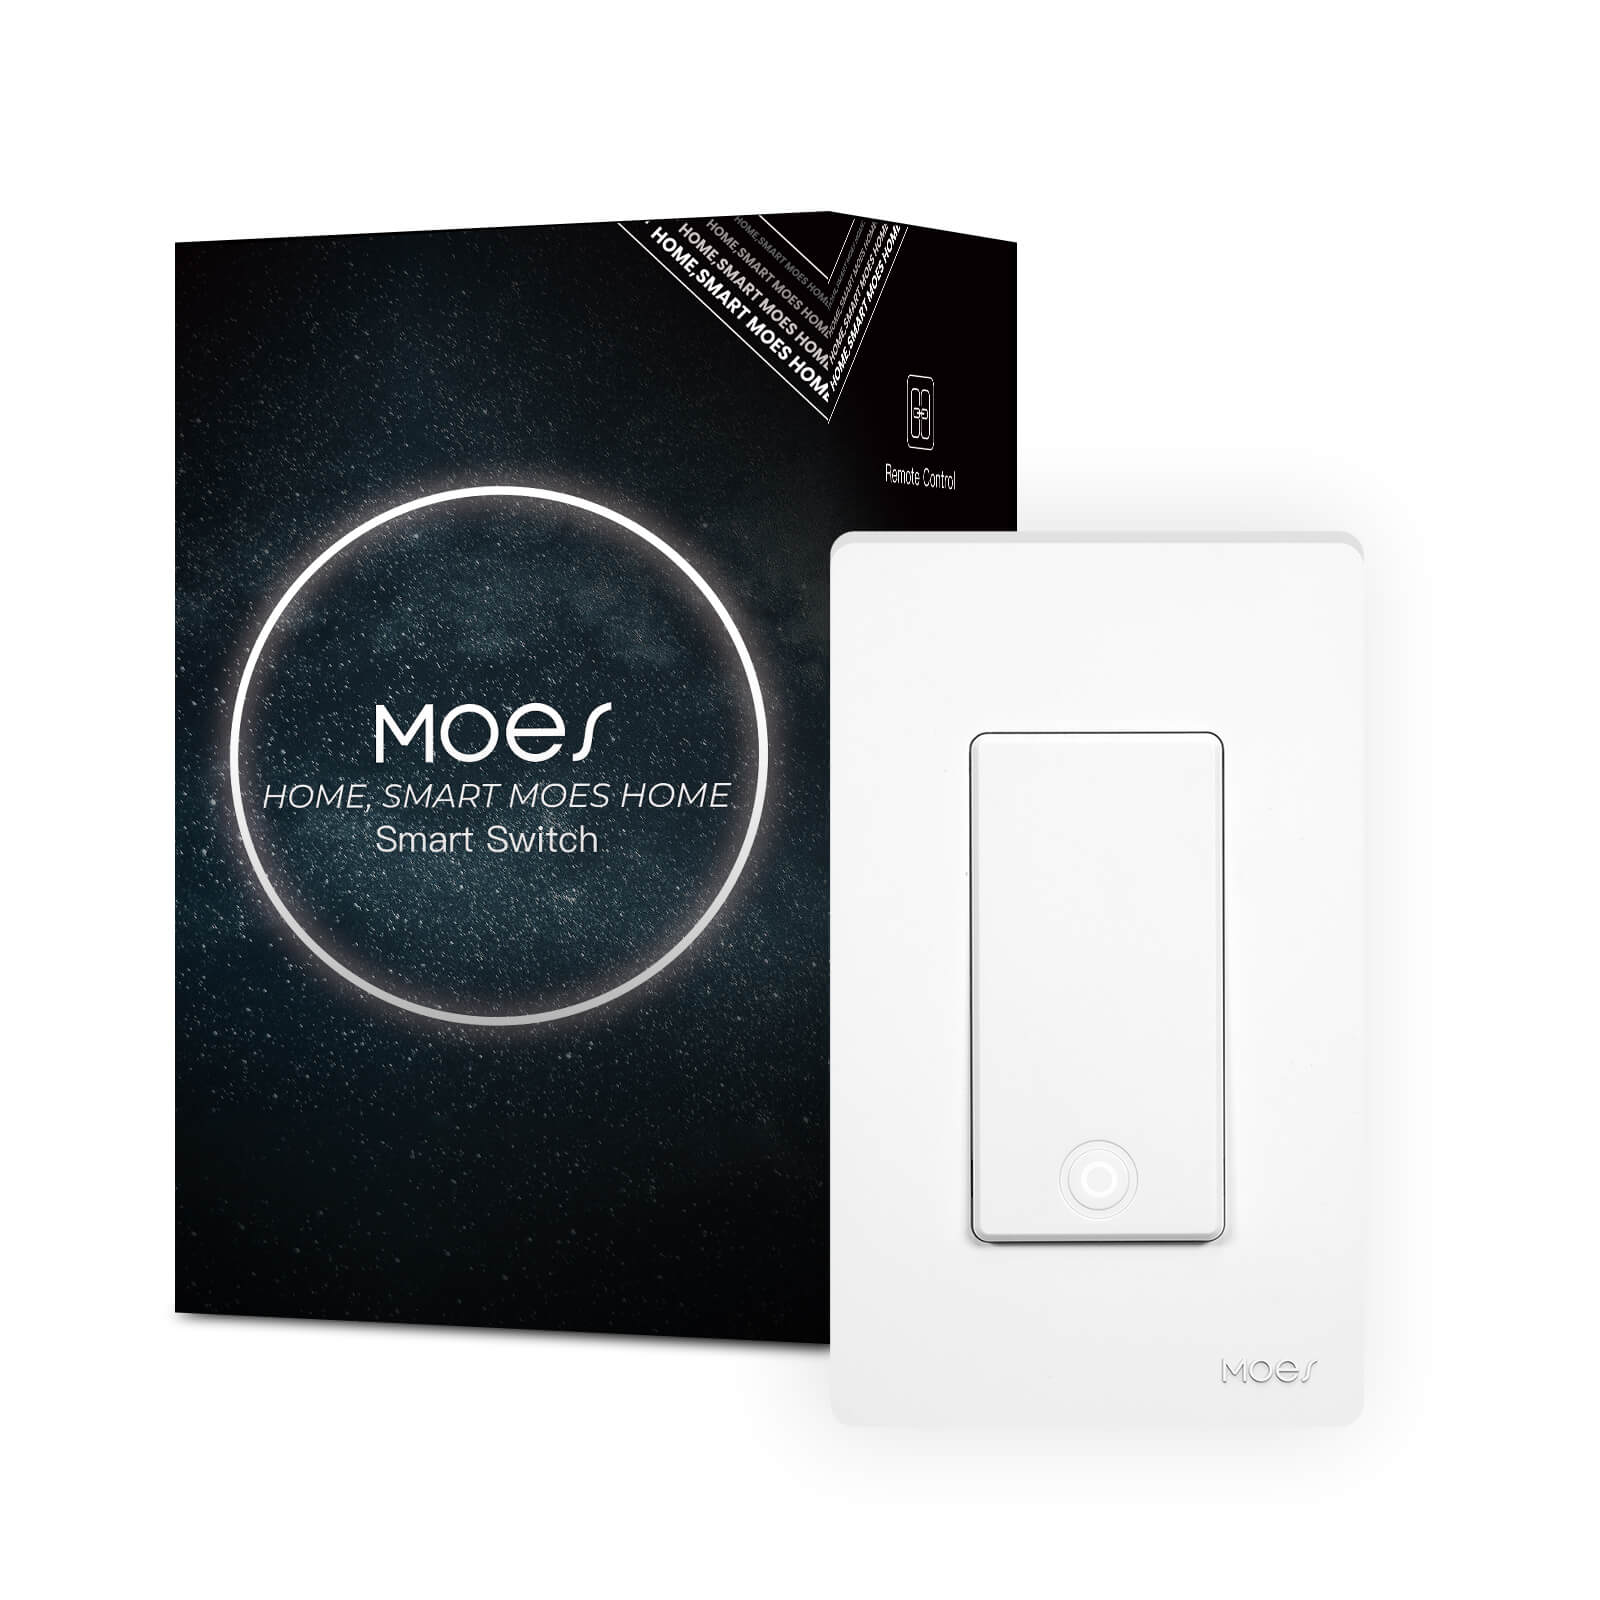 2 smart switches control the same light - MOES